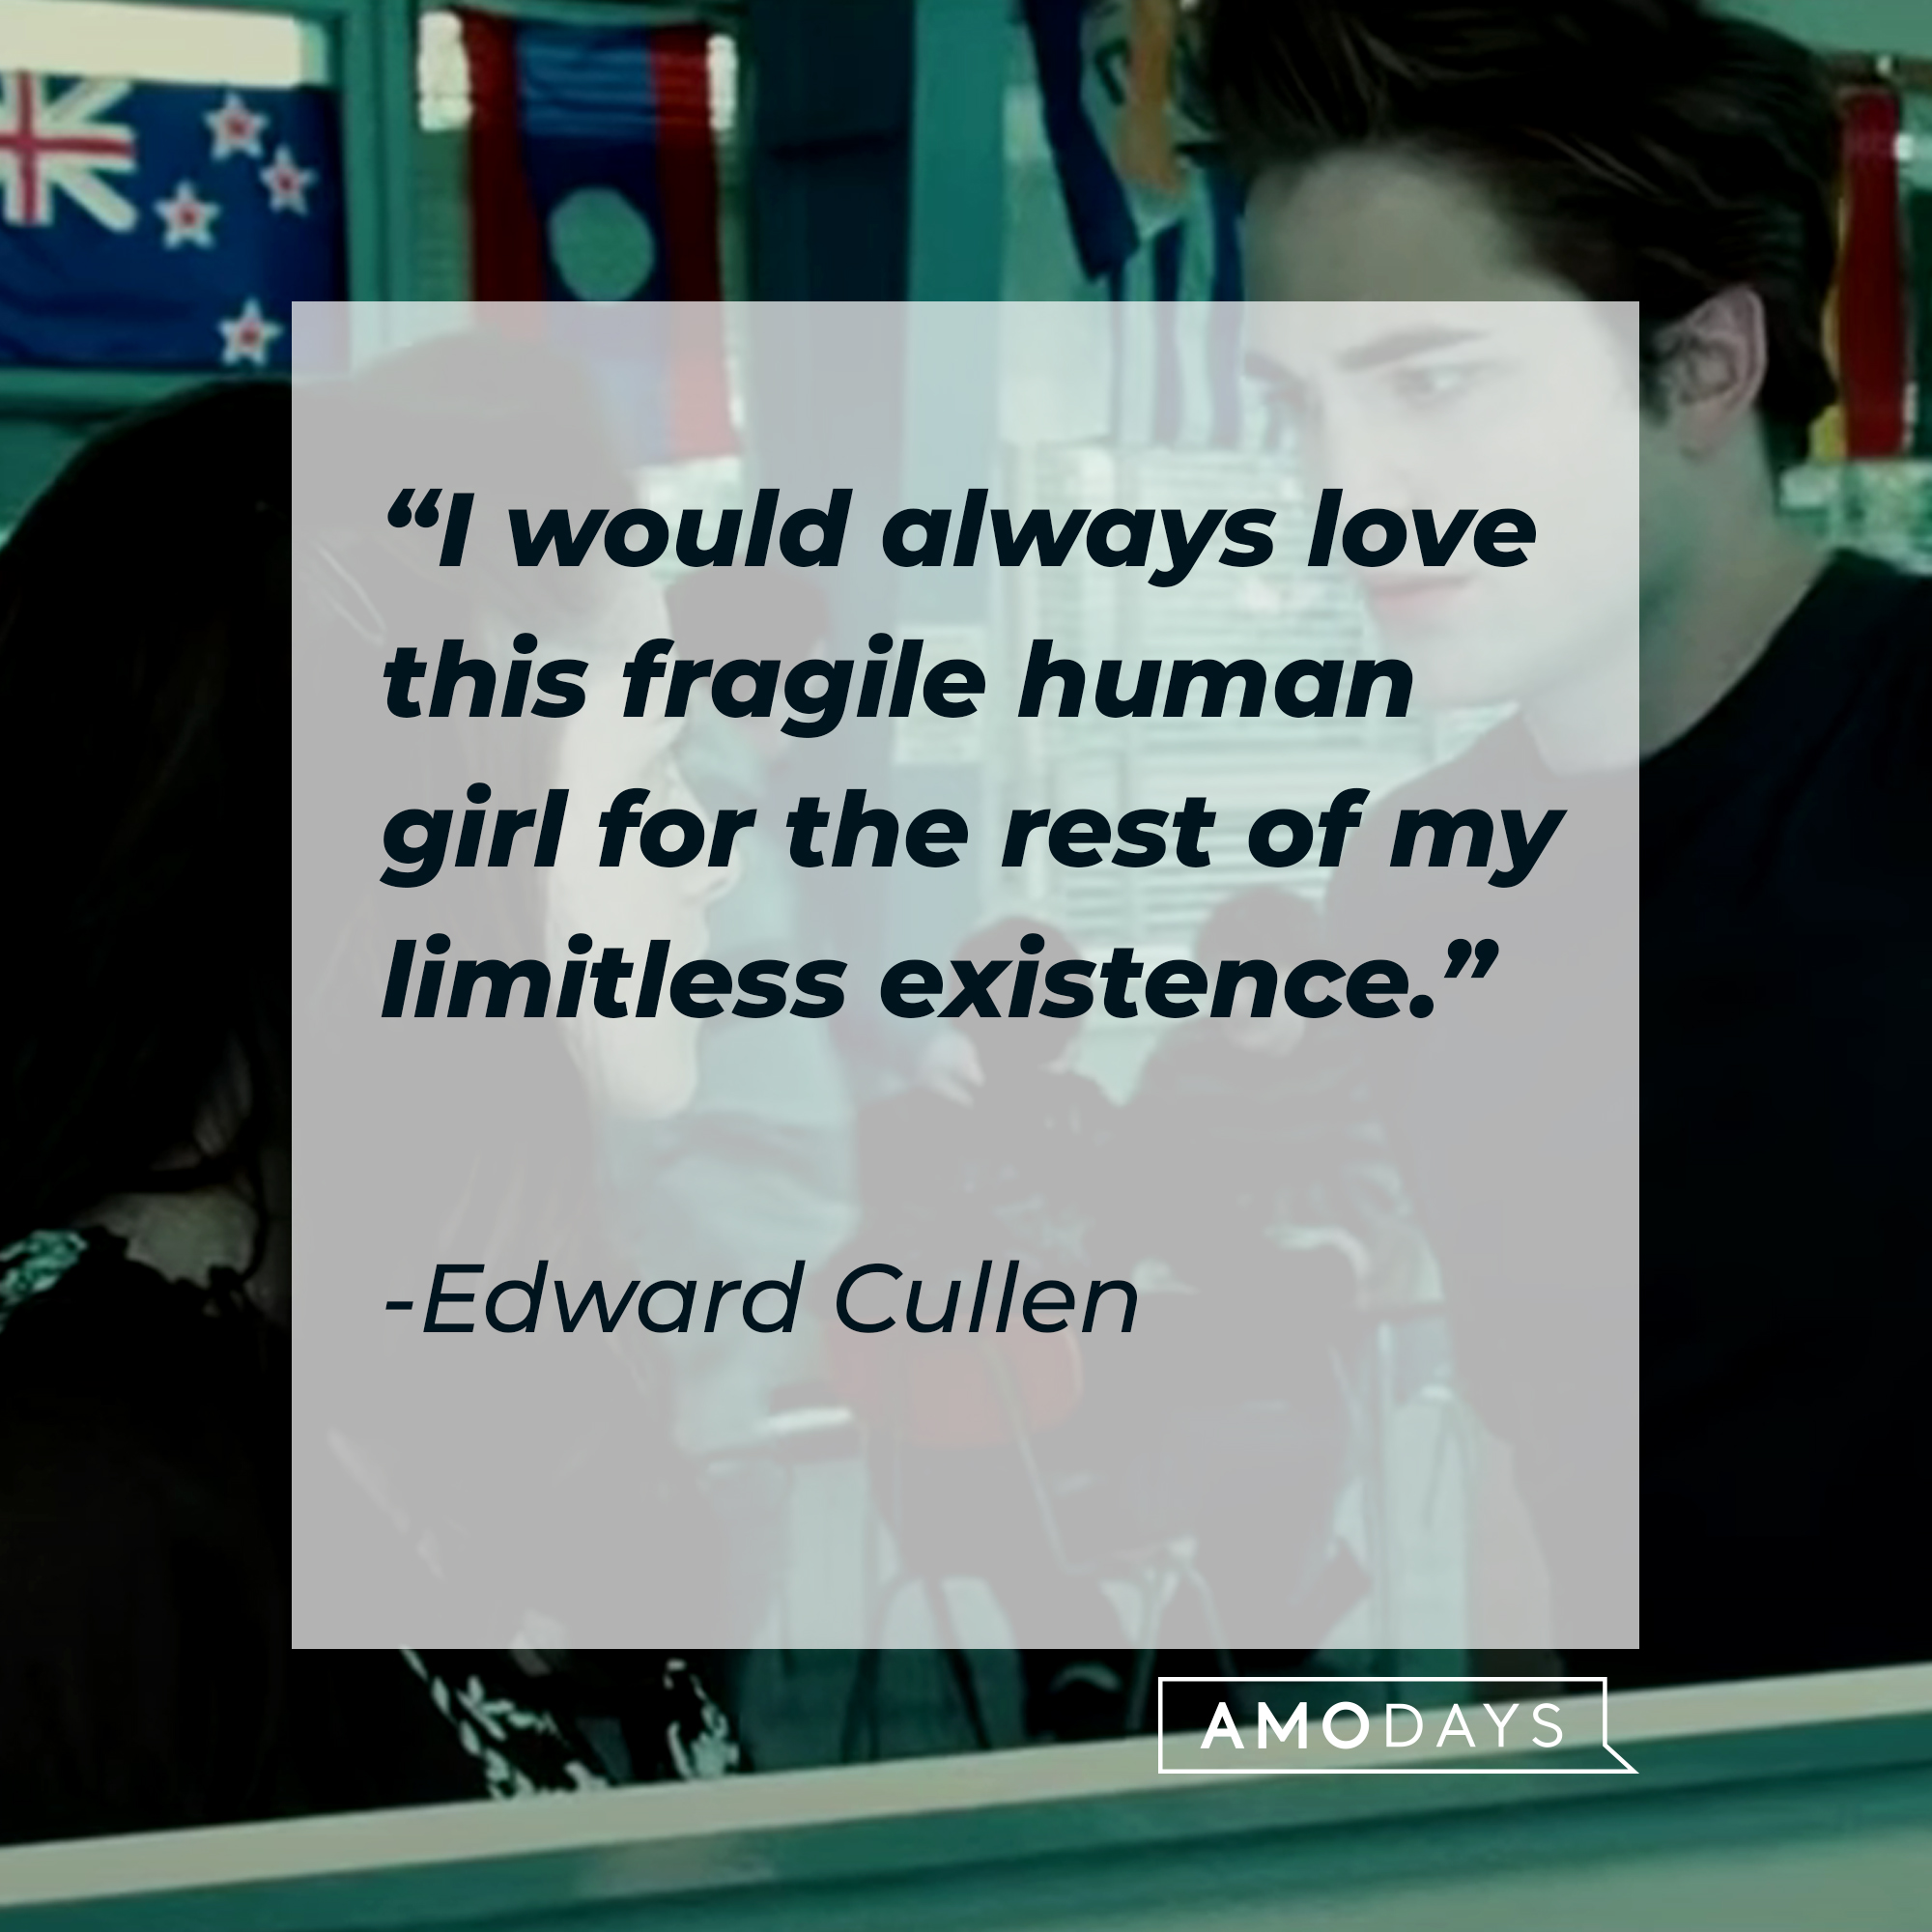 Edward Cullen's quote: “I would always love this fragile human girl for the rest of my limitless existence.” | Source: facebook.com/twilight